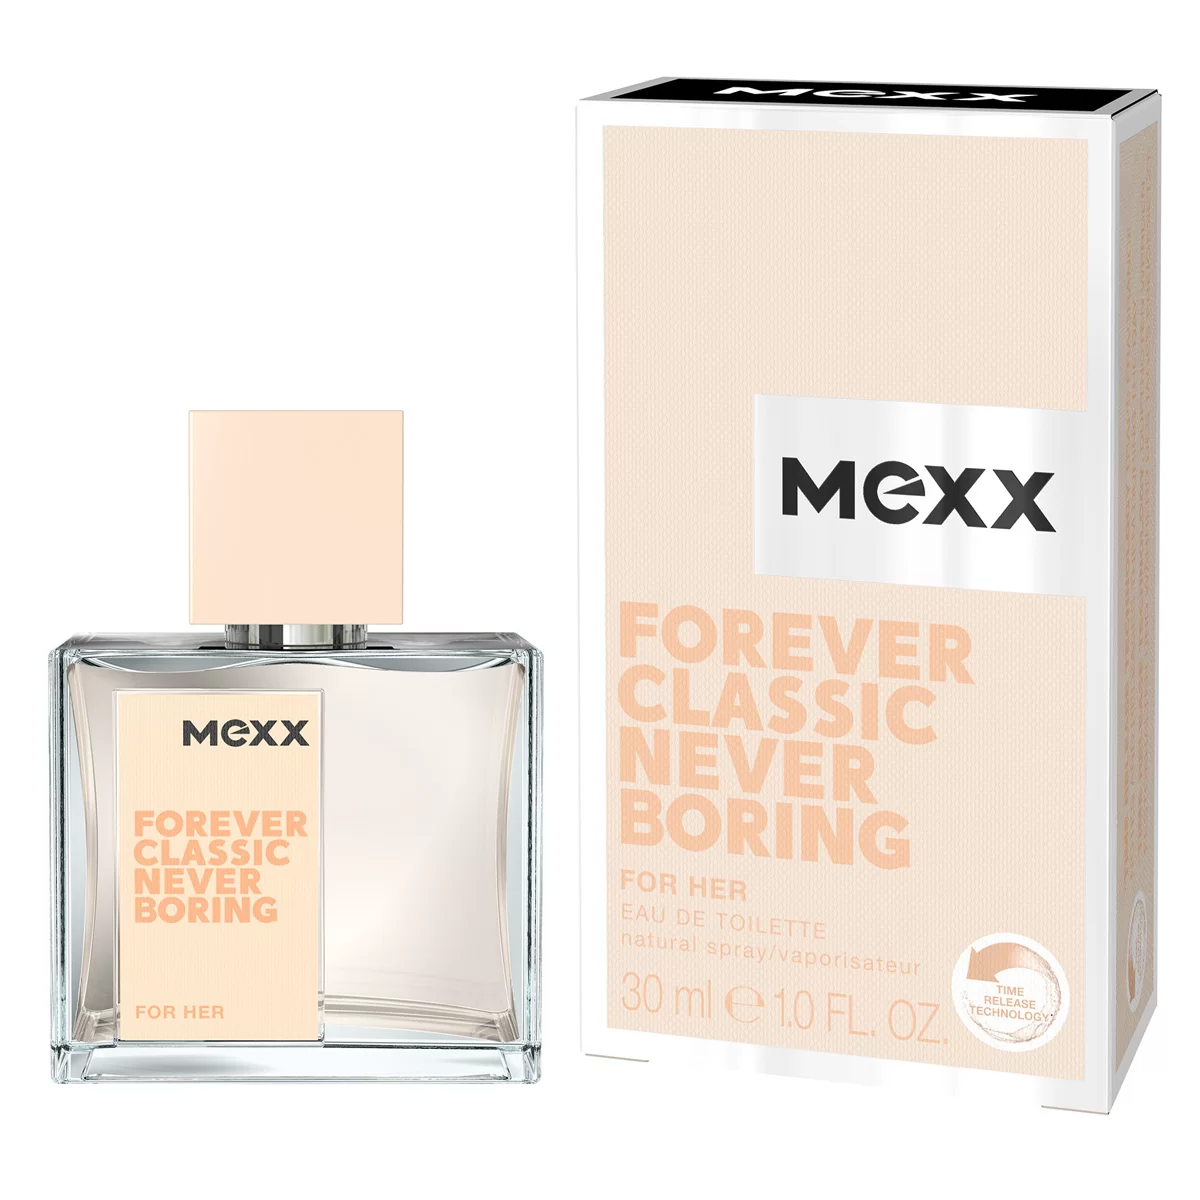 Mexx Forever Classic Never Boring For Her 30ml